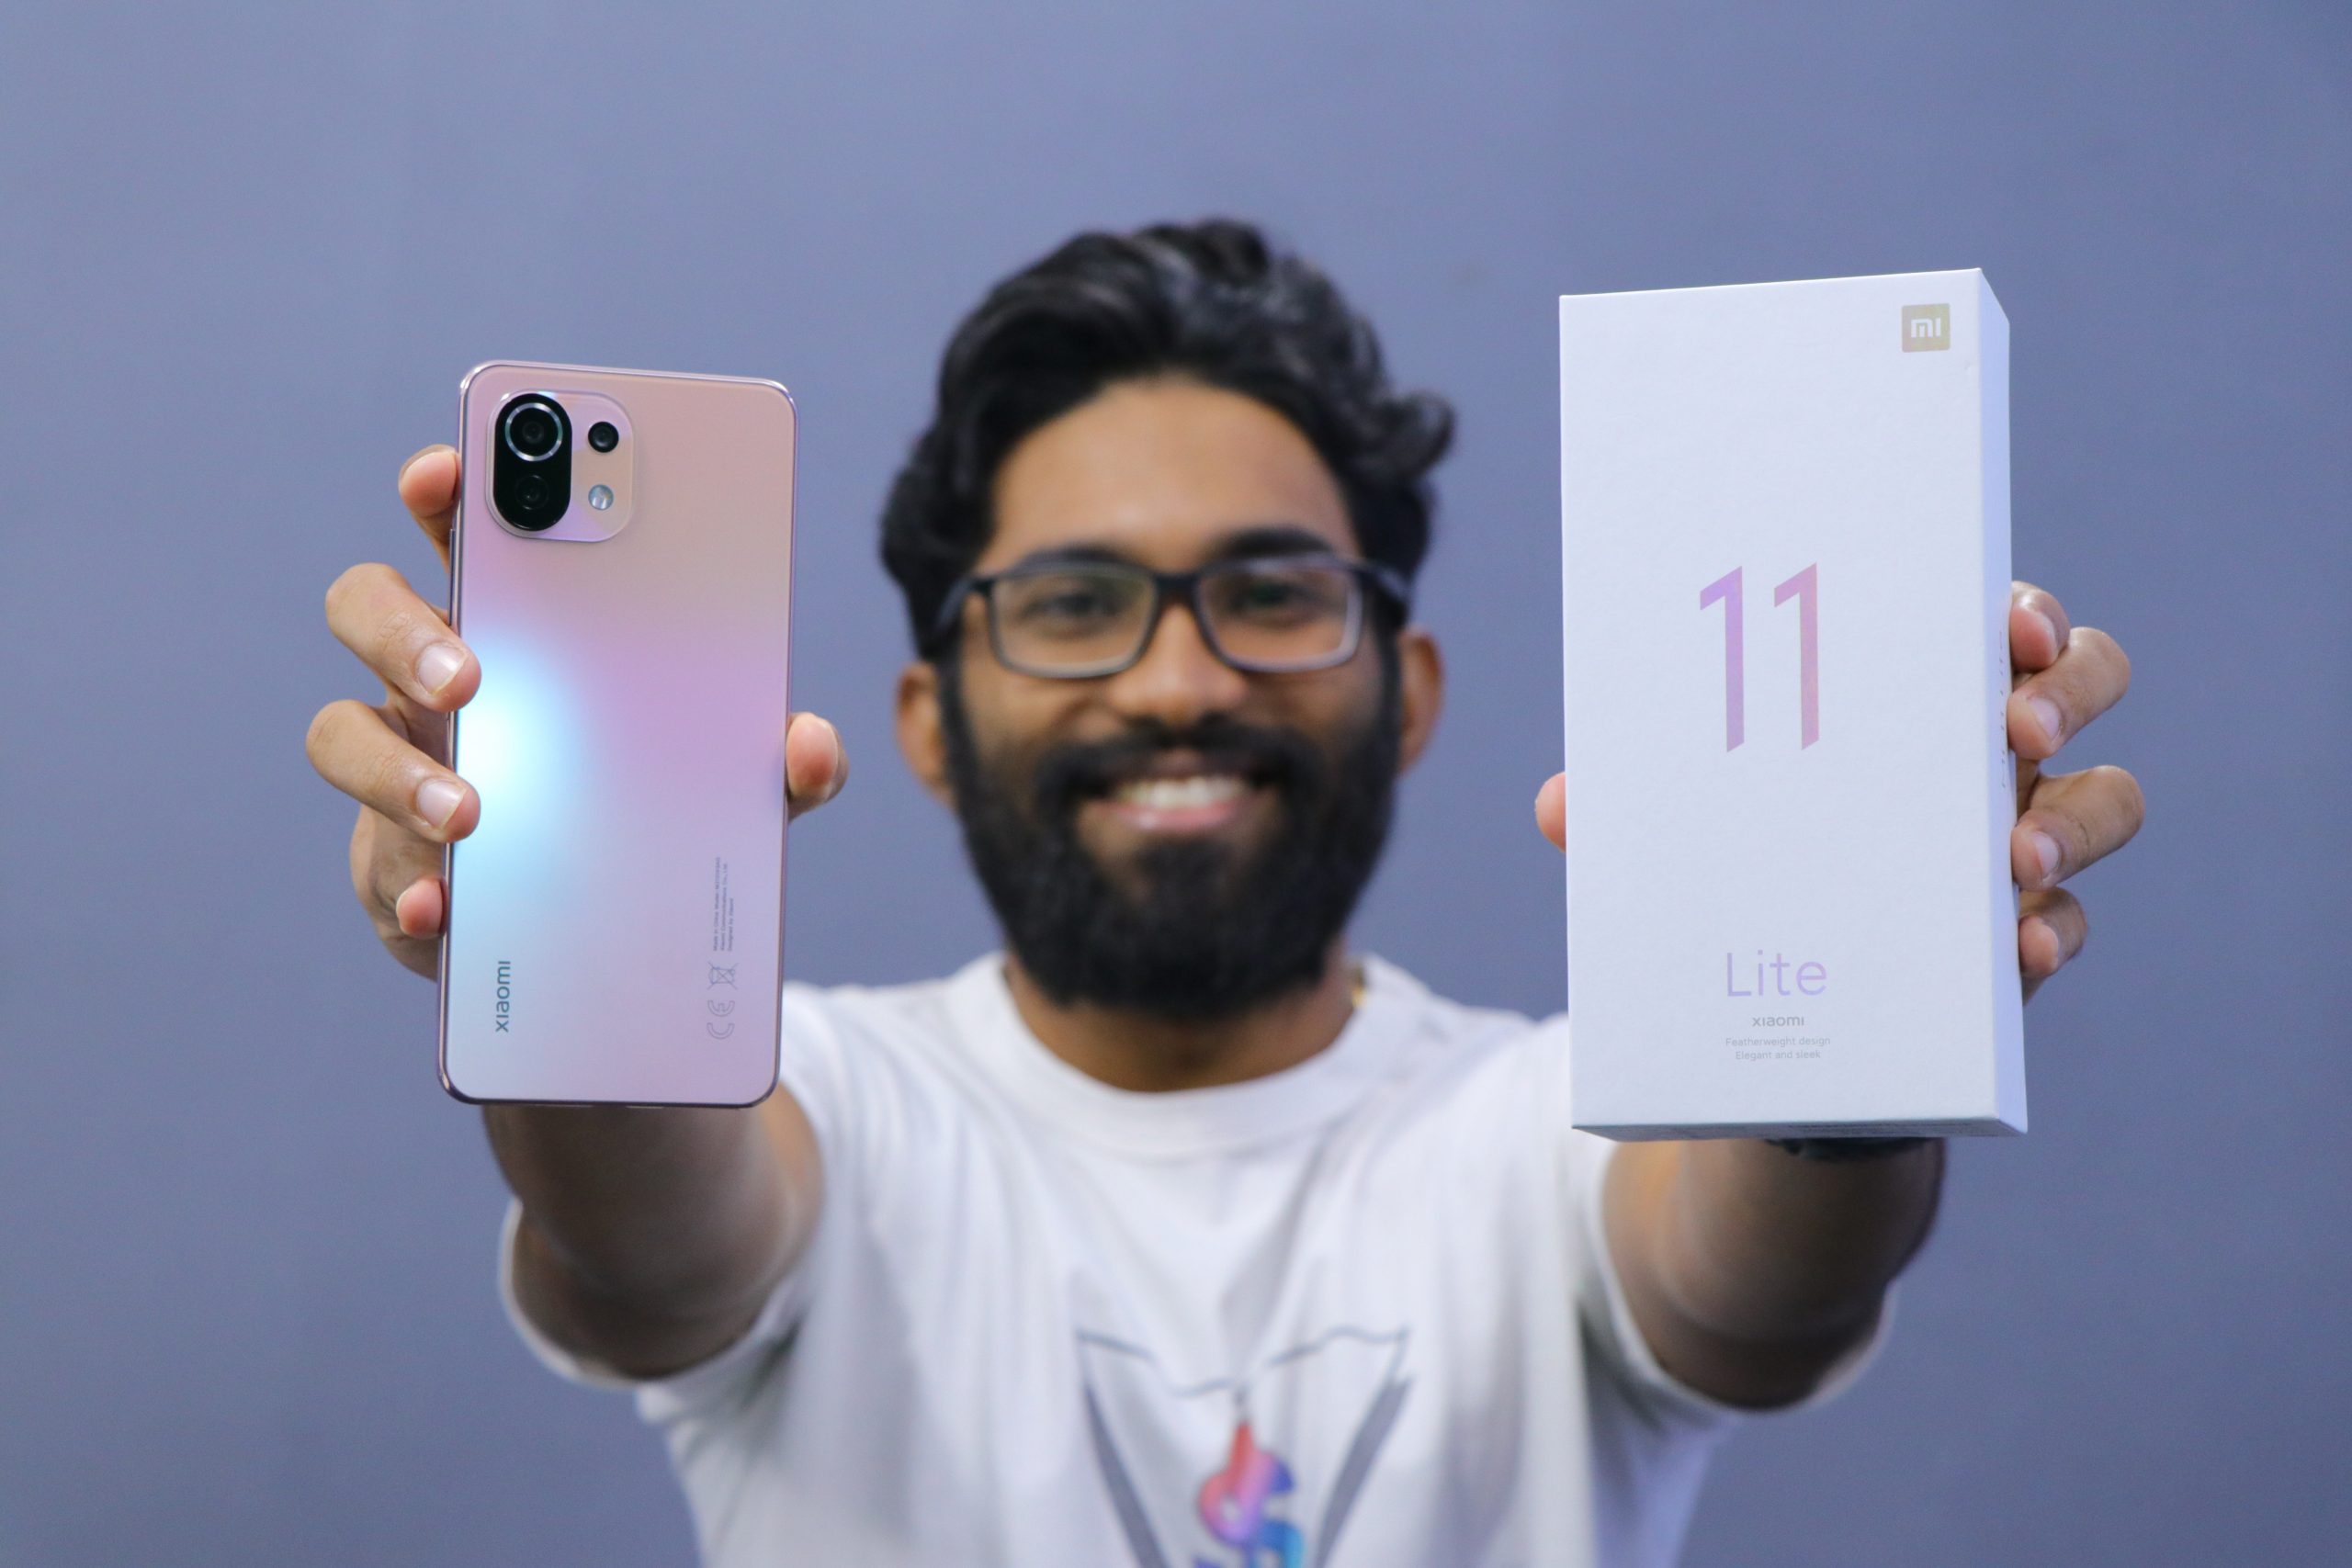 IMG 3232 scaled - Xiaomi Mi 11 Lite Review - Camera, Performance, Battery tested in depth!